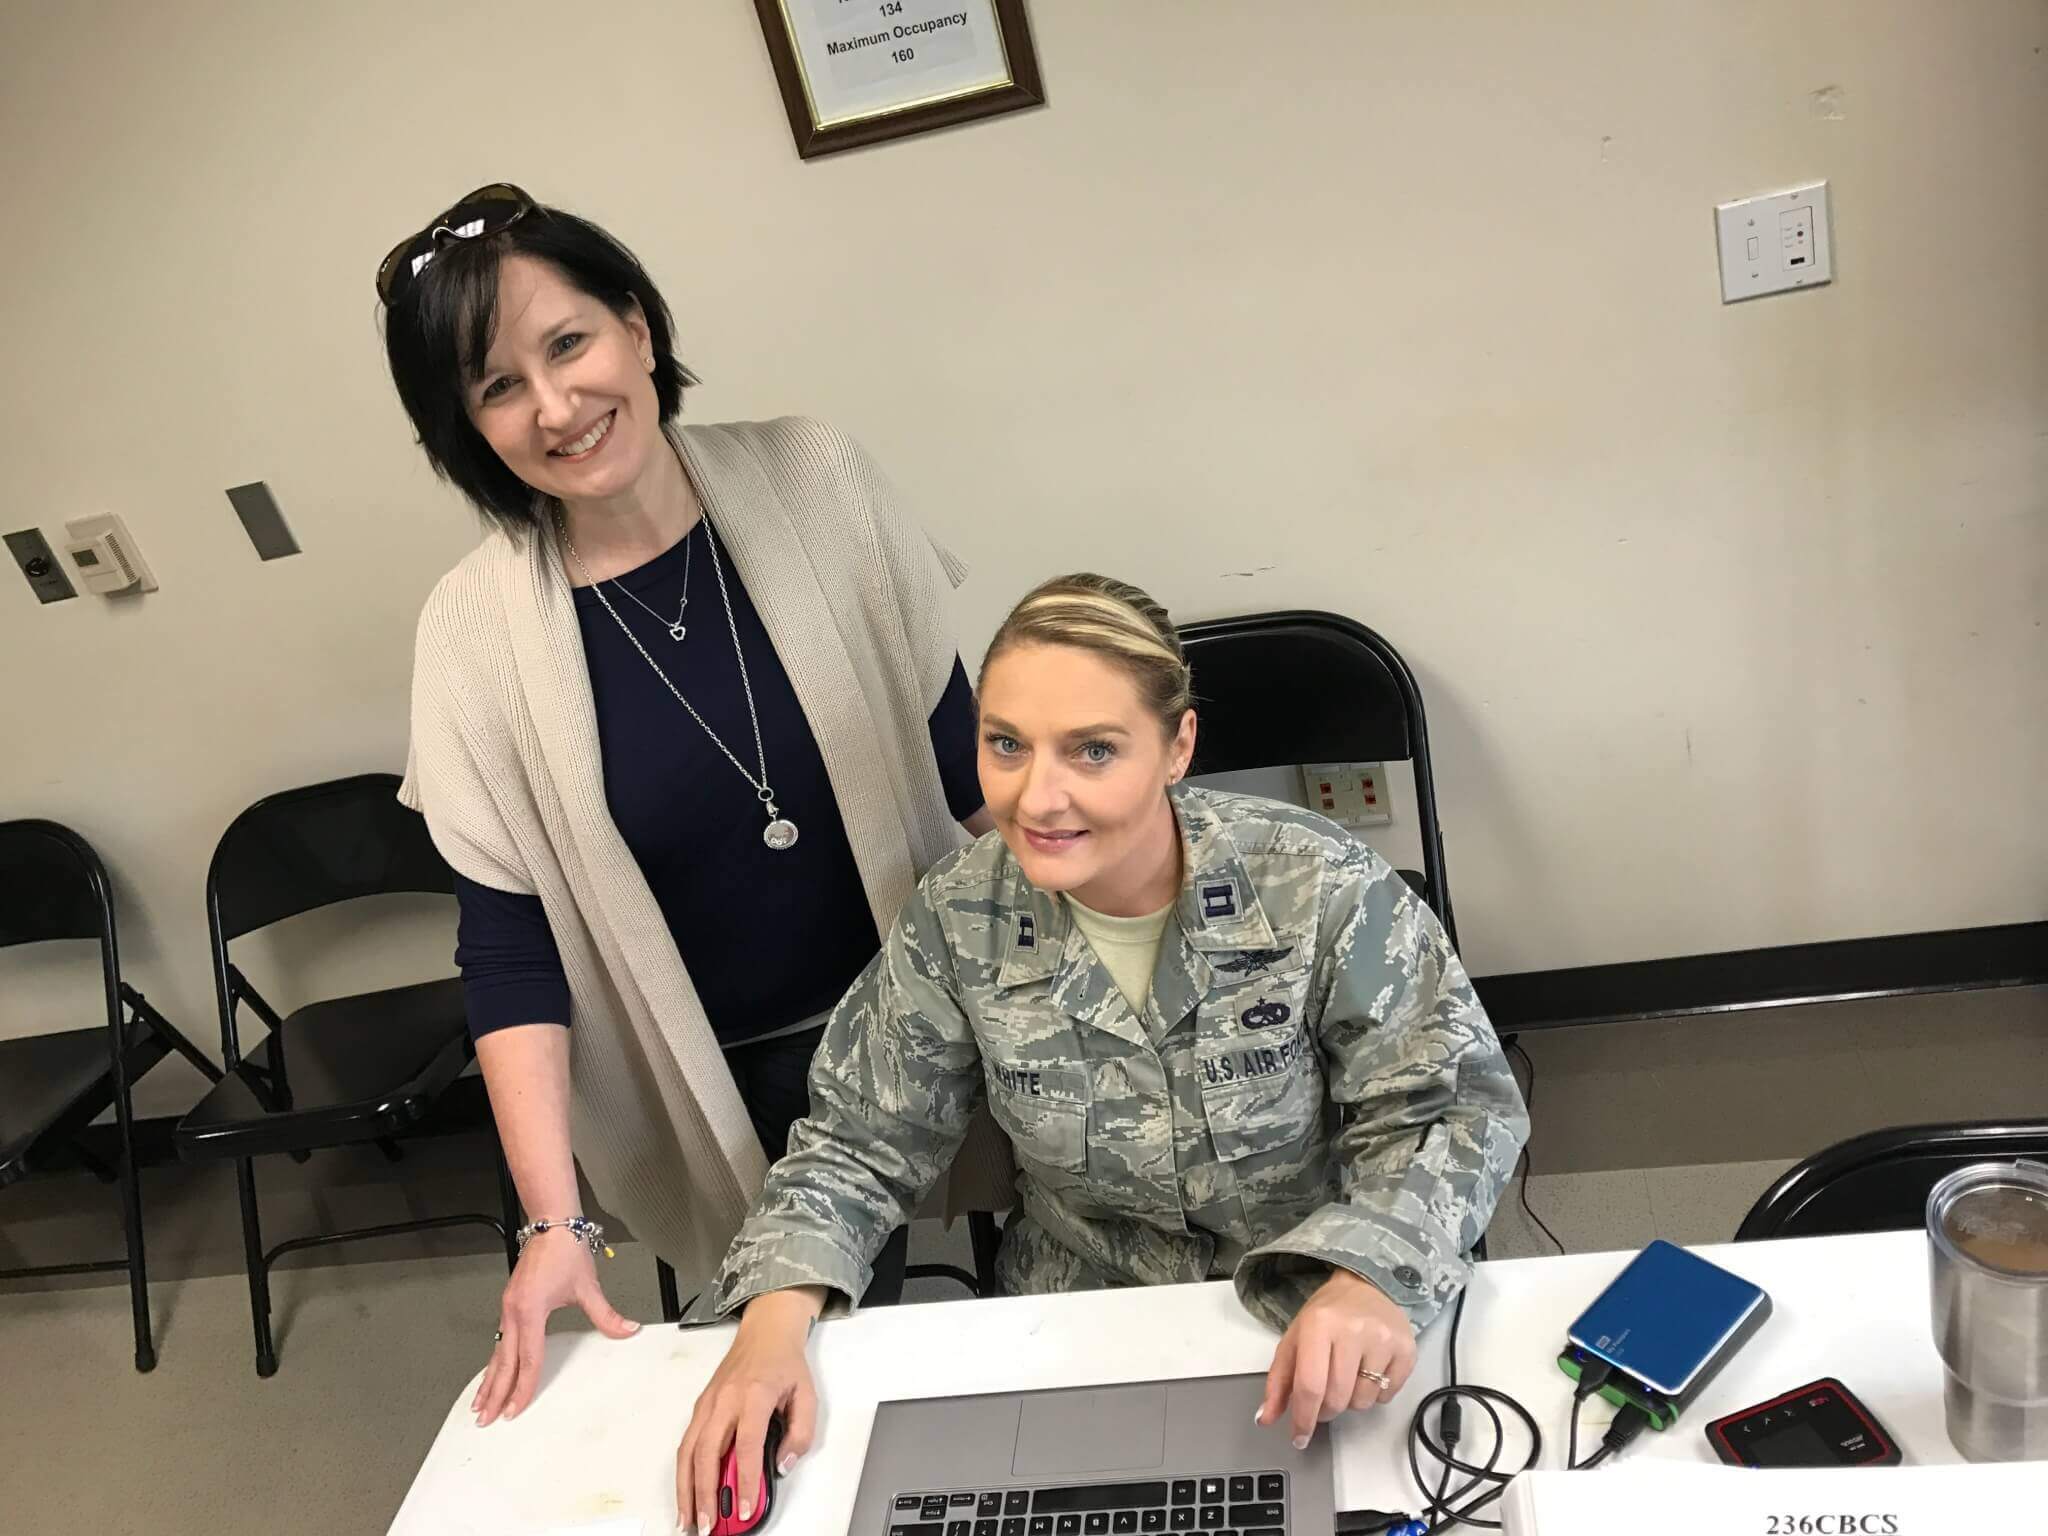 Danielle Trosclair, pictured with a member of the Louisiana National Guard, is the program manager for the National Guard Employment Network. Submitted photo.